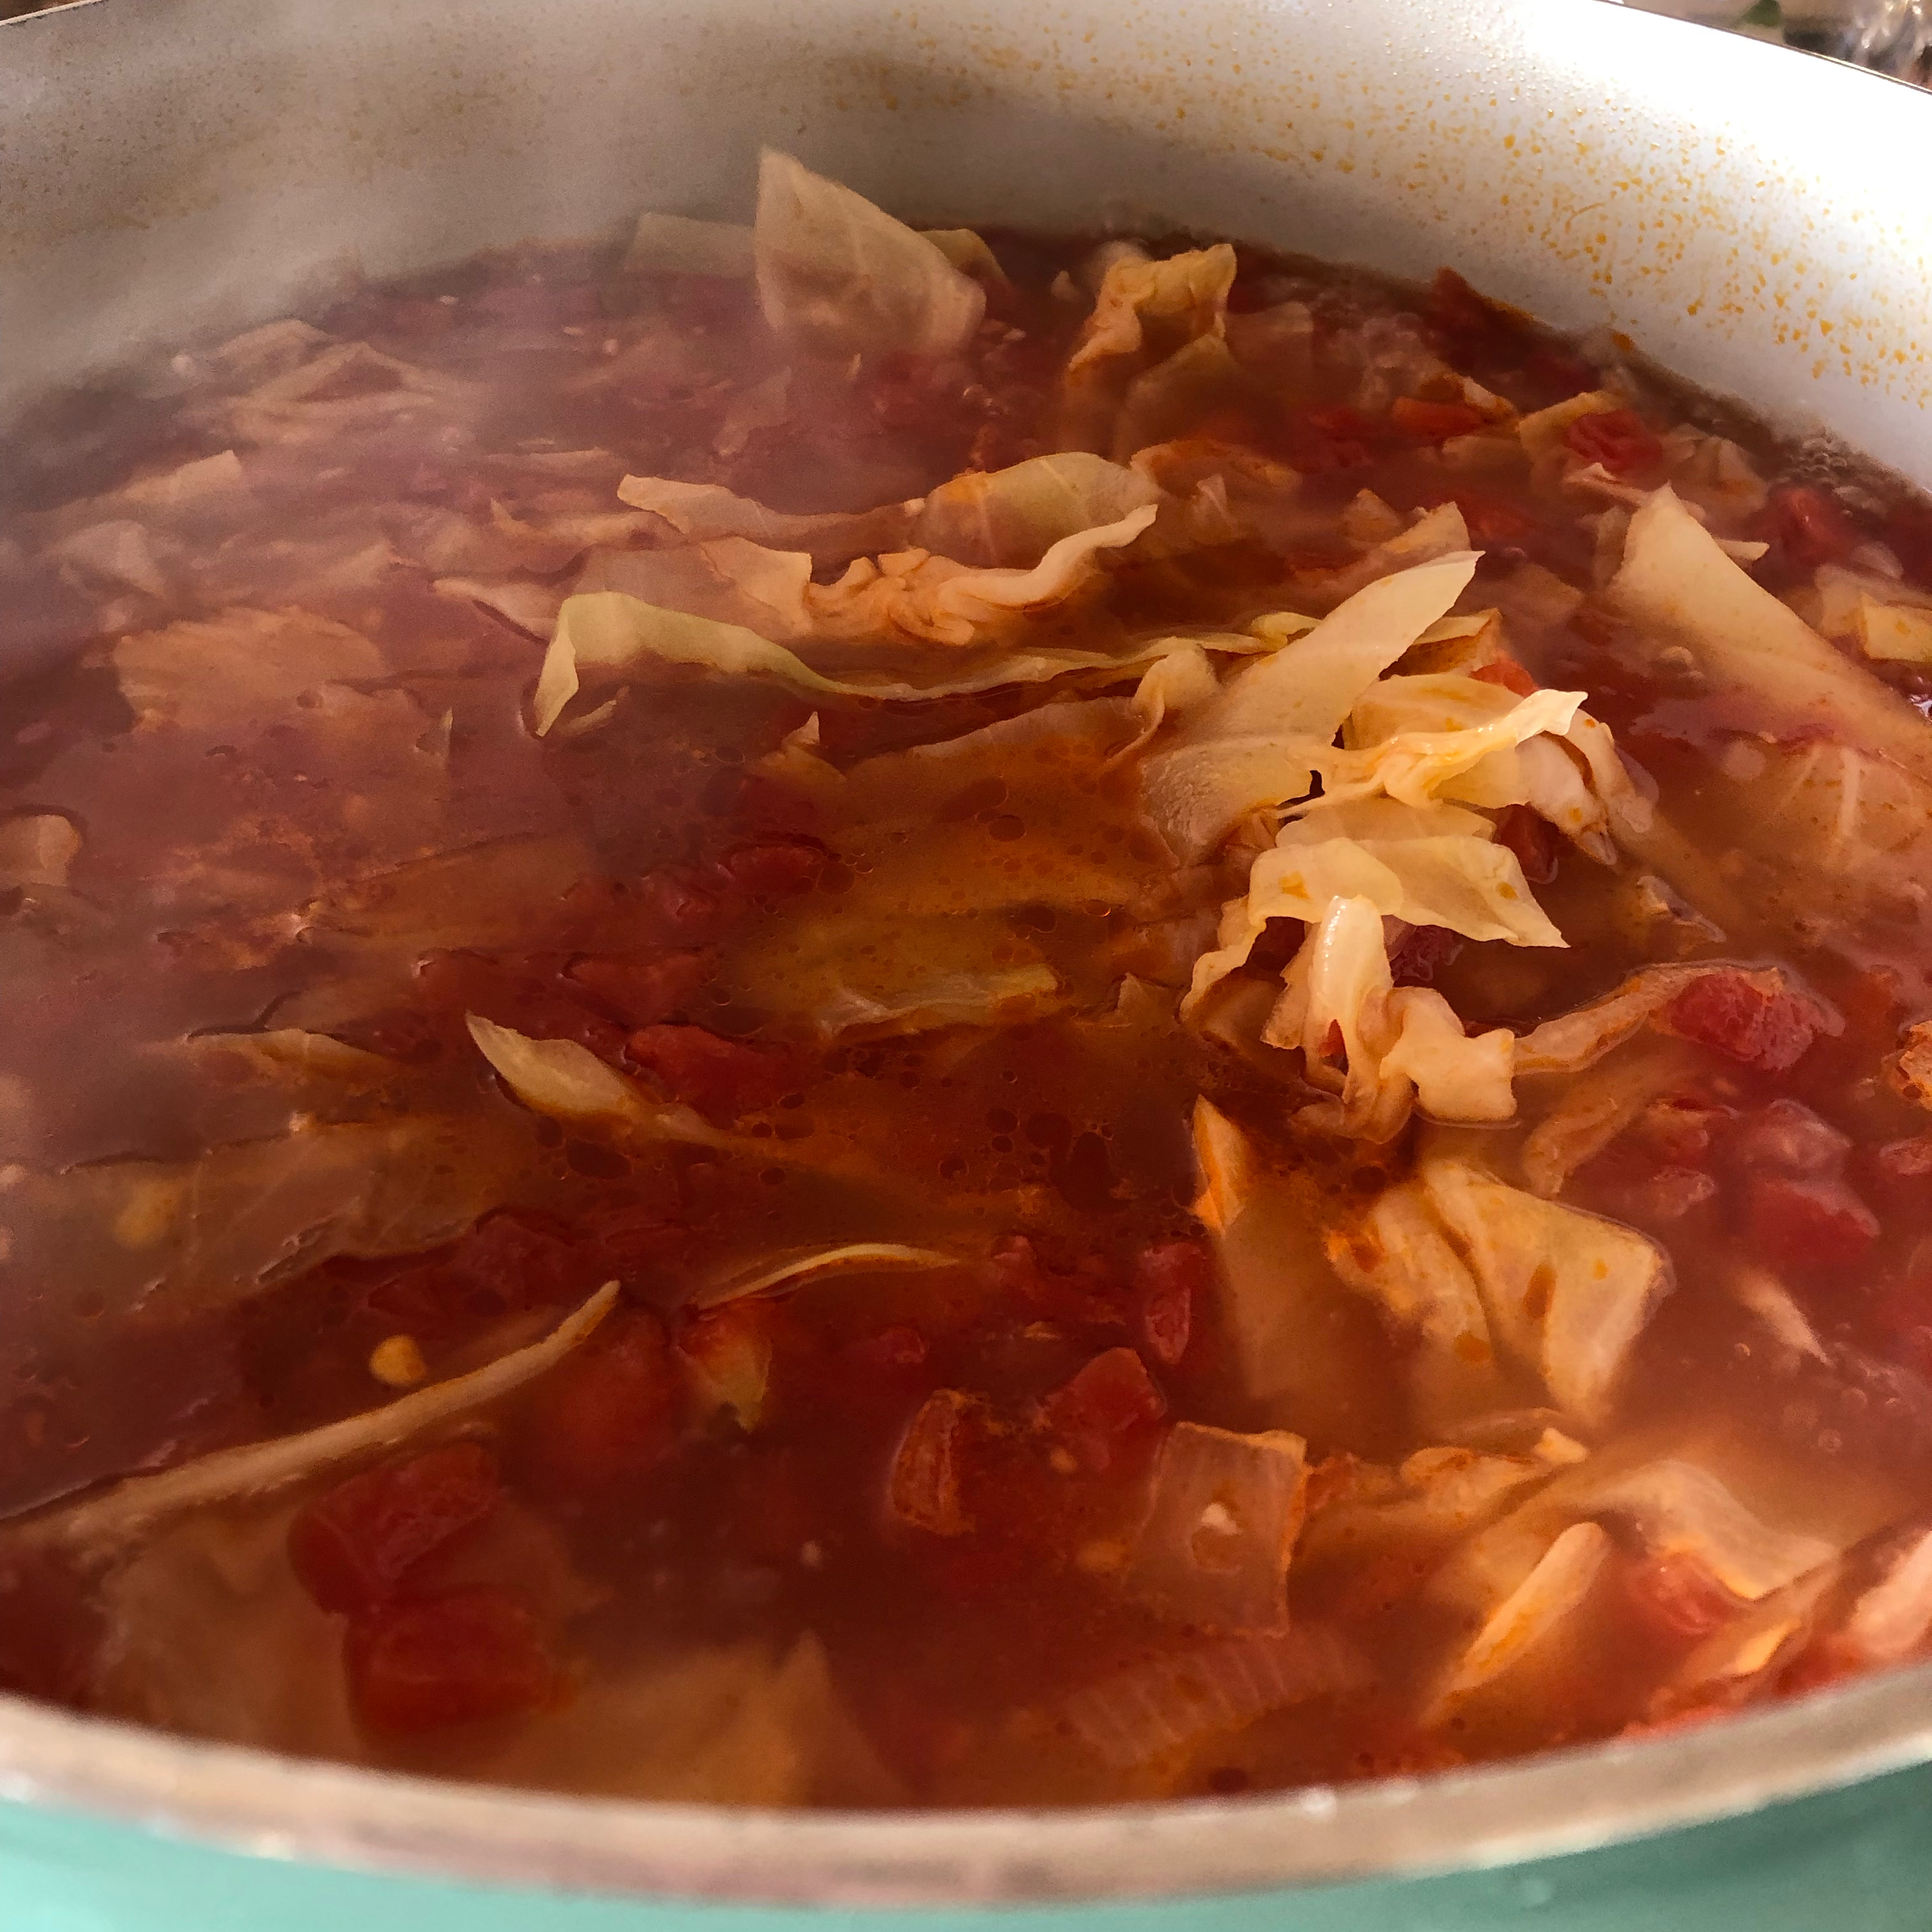 Healing Cabbage Soup abqmeaghan